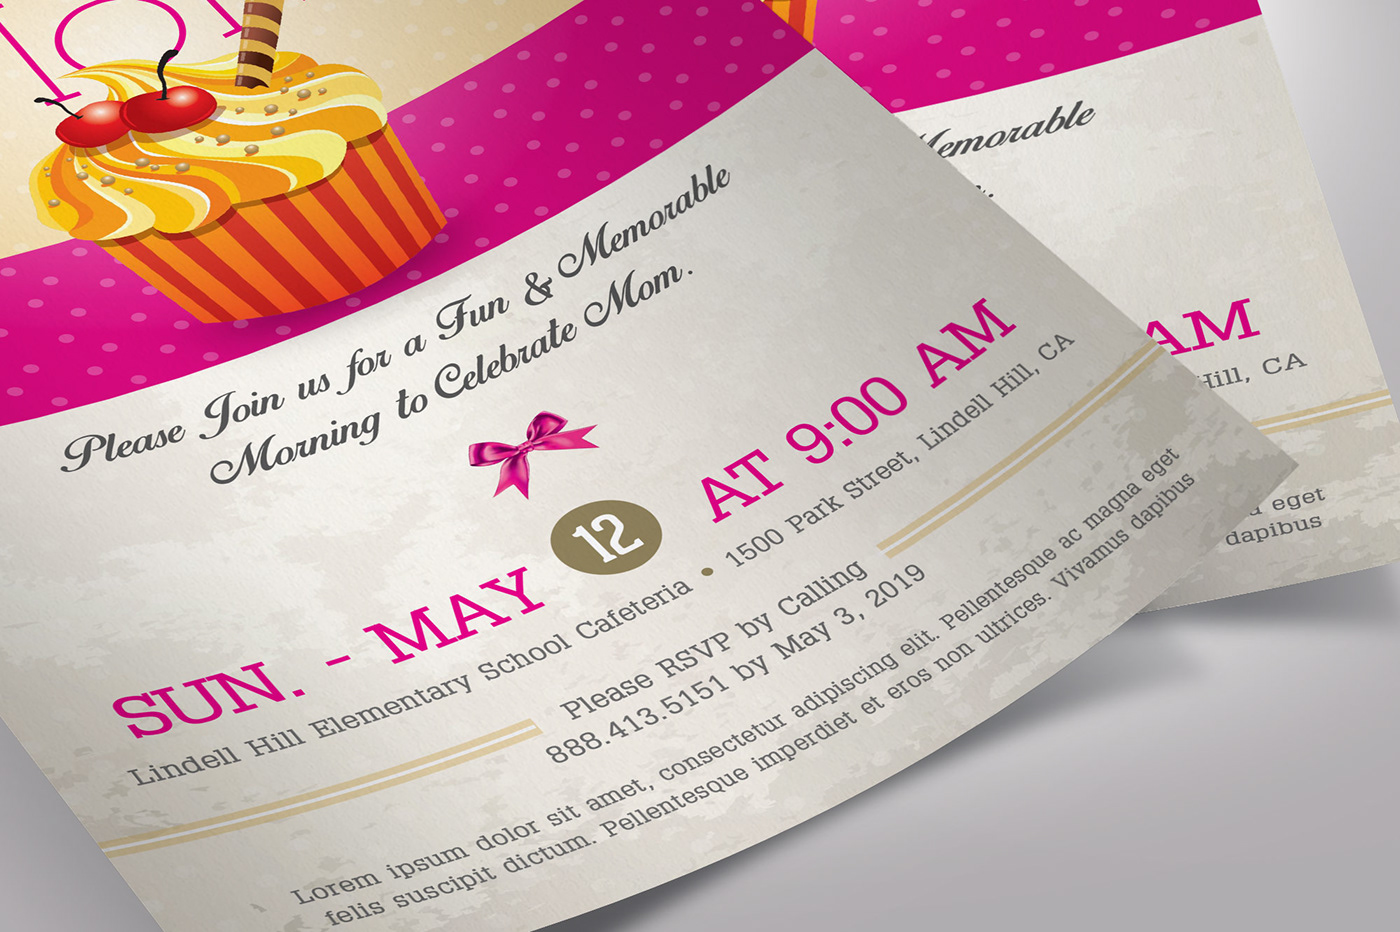 muffins moms mothers day school flyer flyer template church invitation magenta yellow retro cup cakes teachers meeting lunch and learn